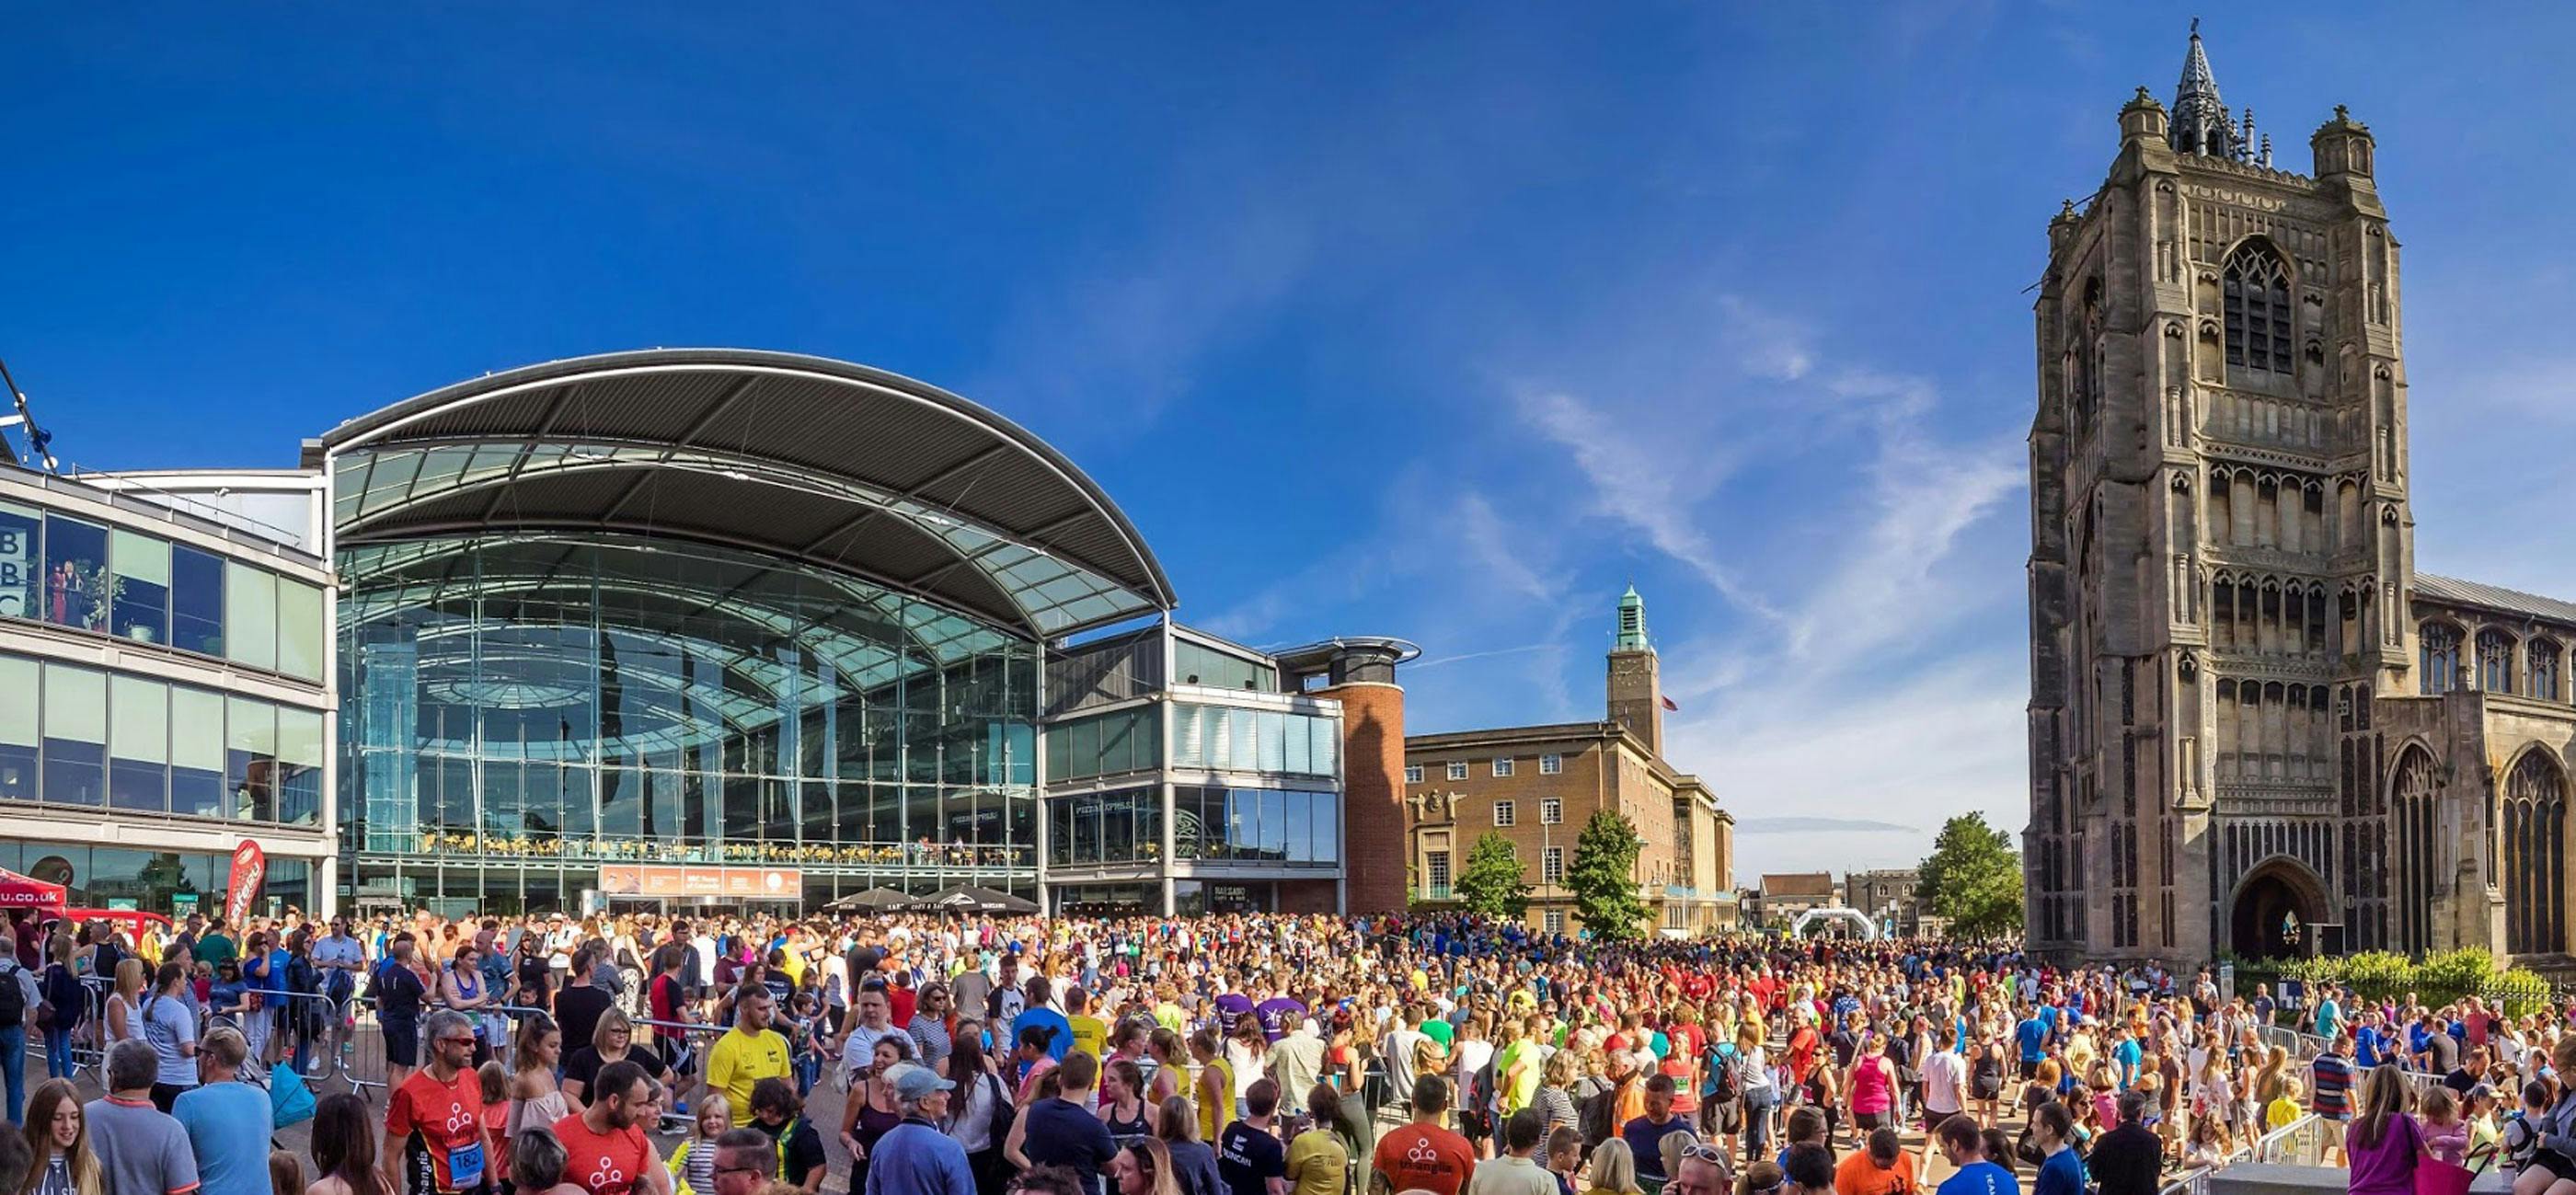 Crowds gathered outside The Forum for Run Norwich